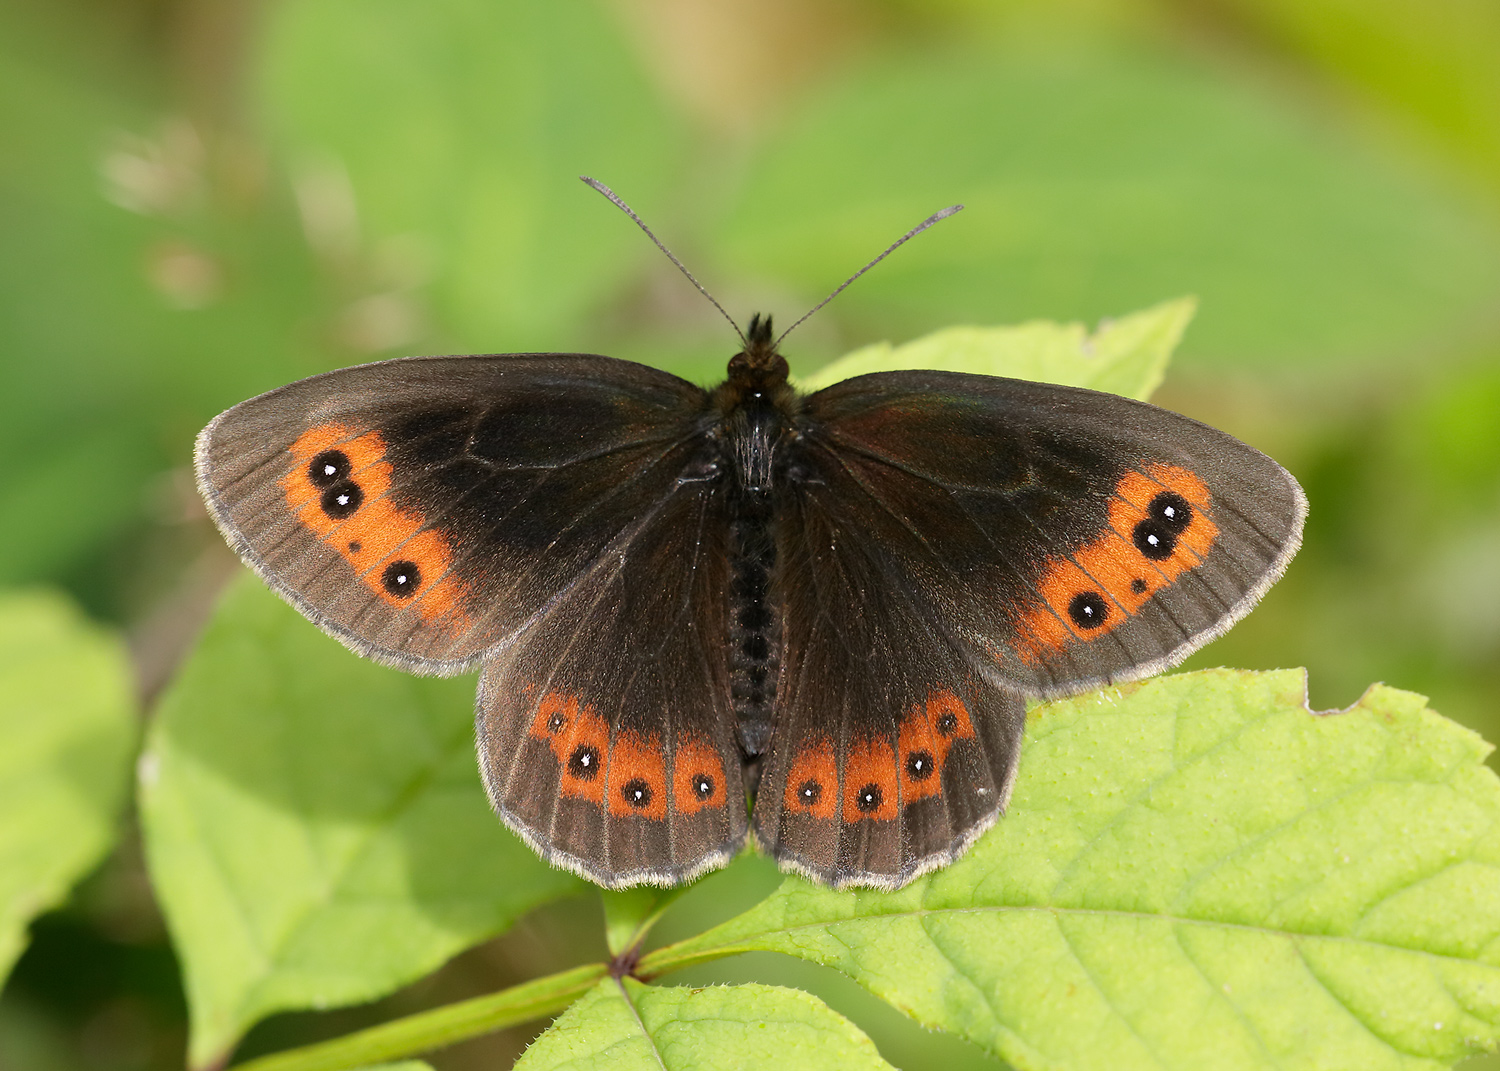 A Scotch argus butterfly with brown wings, orange patches and black dots with white centres rests on a leaf